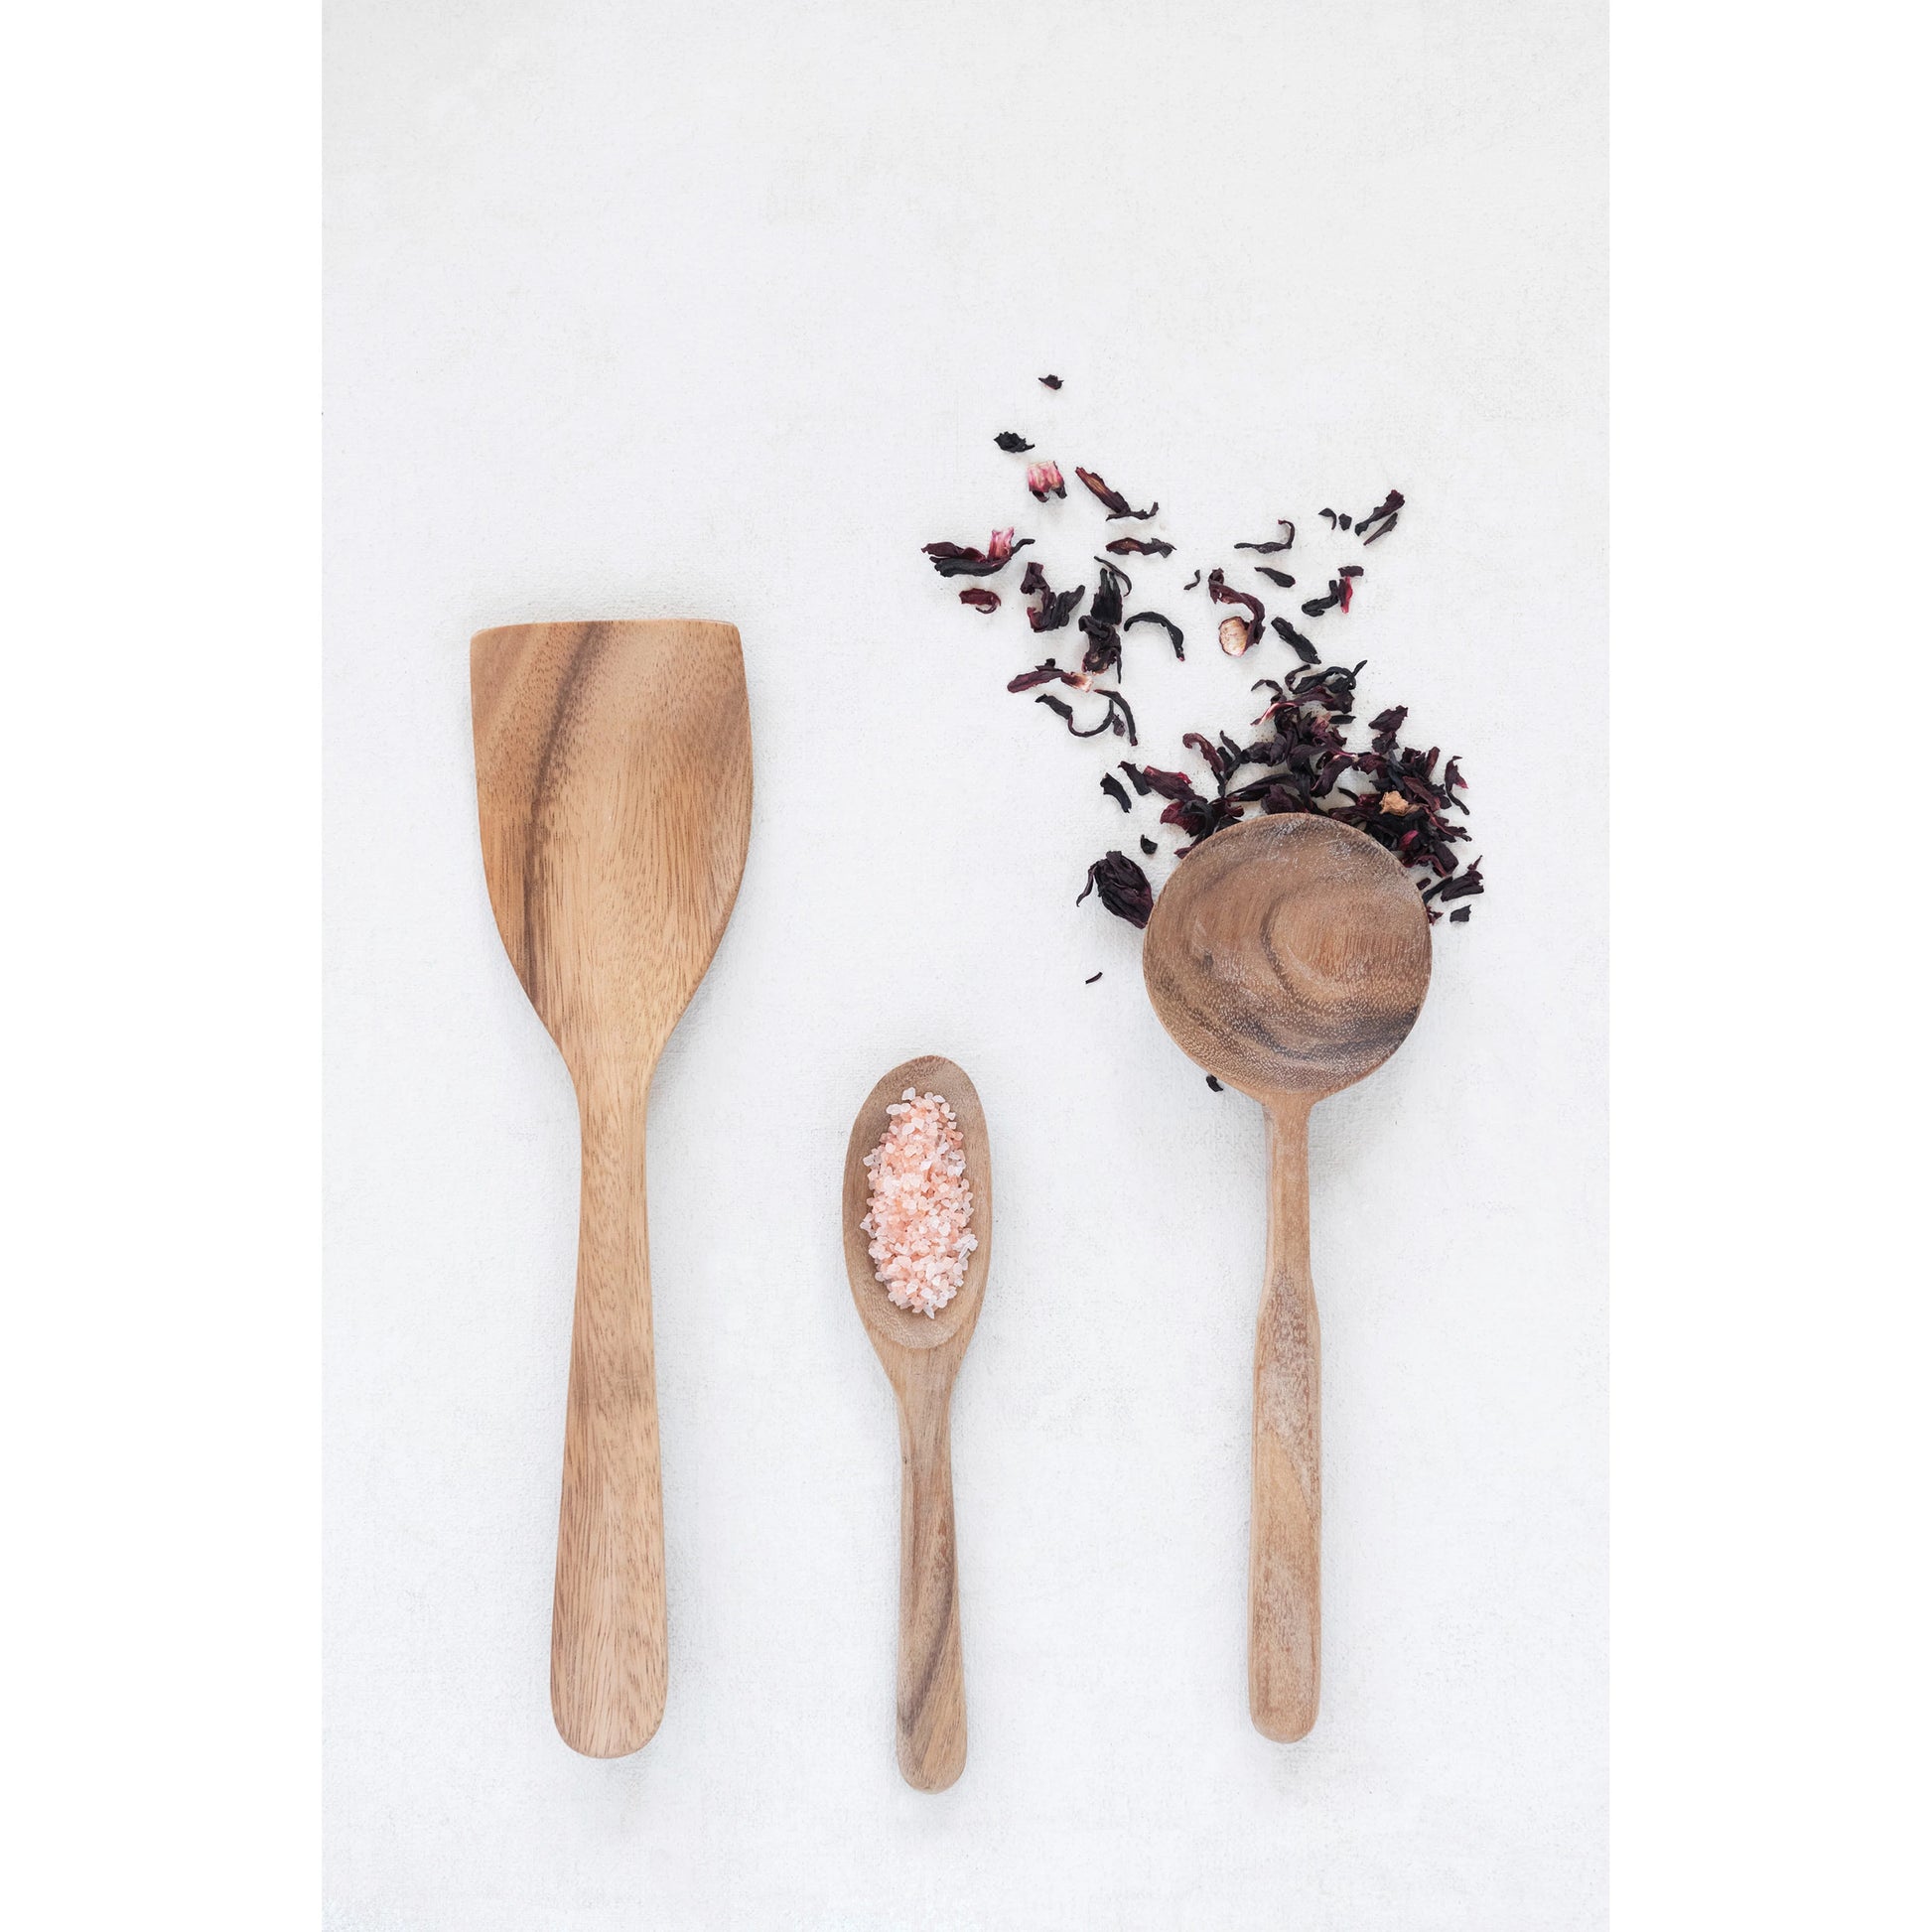 three different shaped spoons displayed with spices on a white background